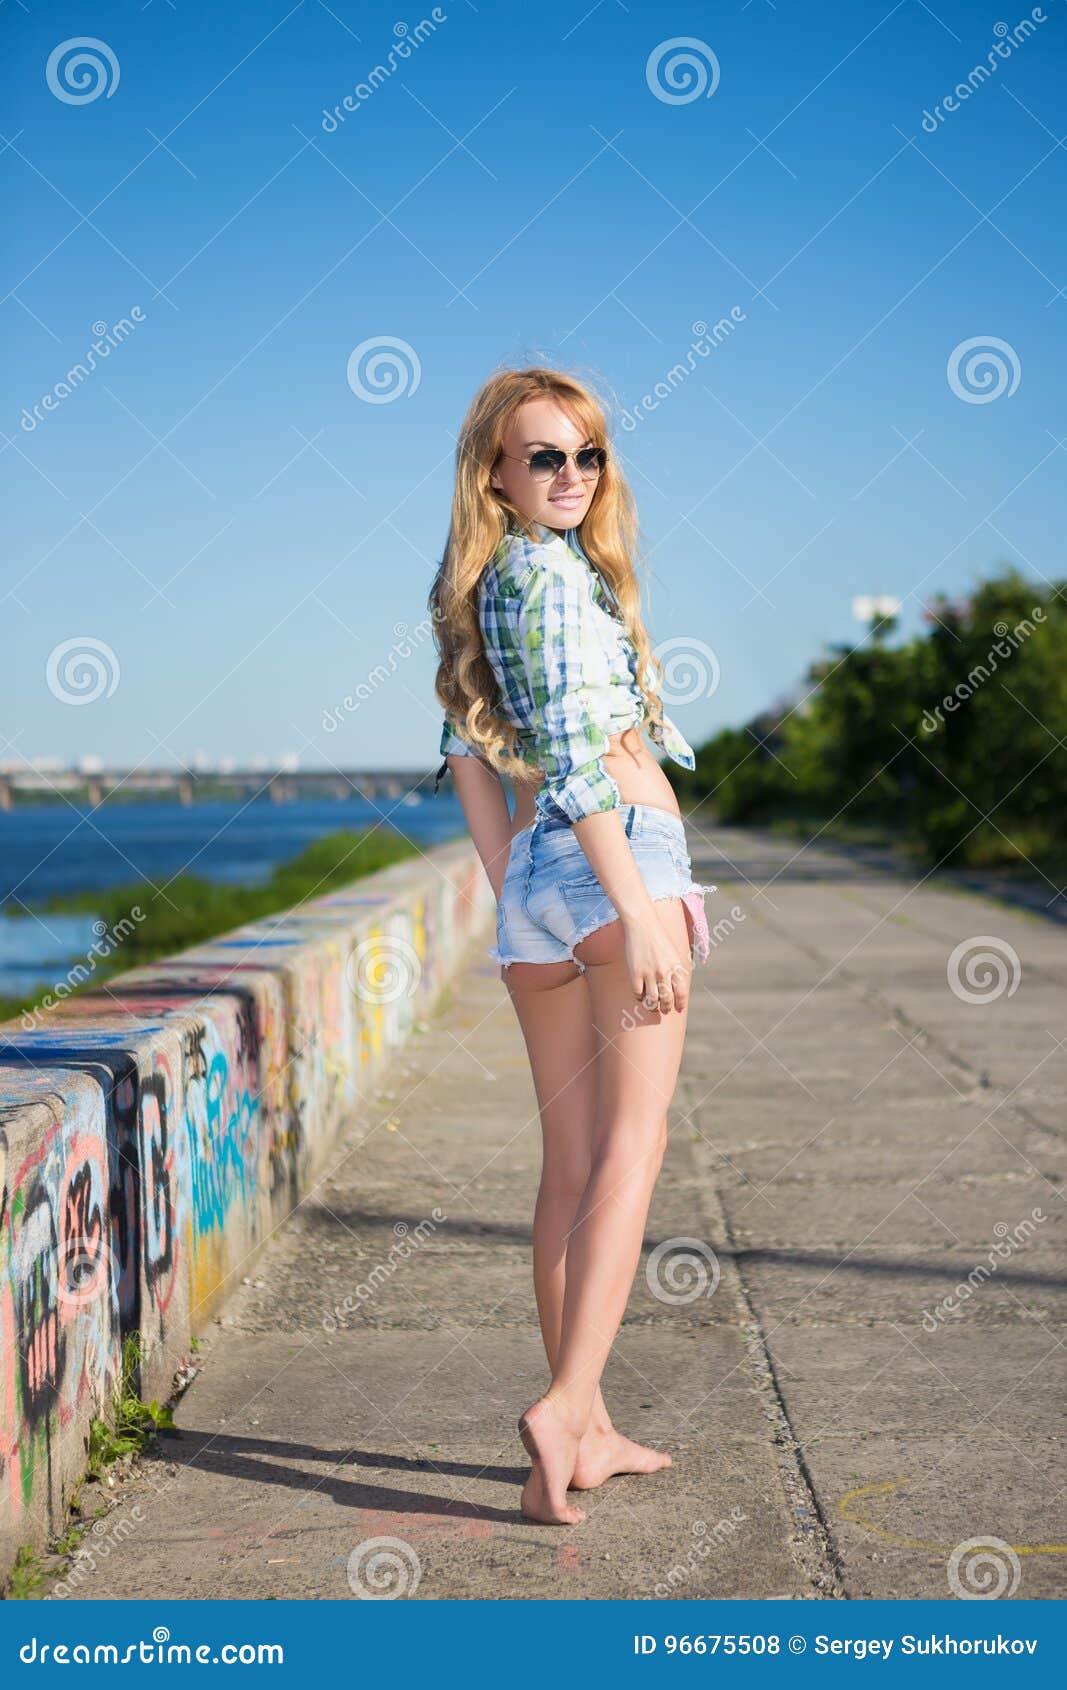 Pretty young blond woman stock photo. Image of barefoot - 96675508